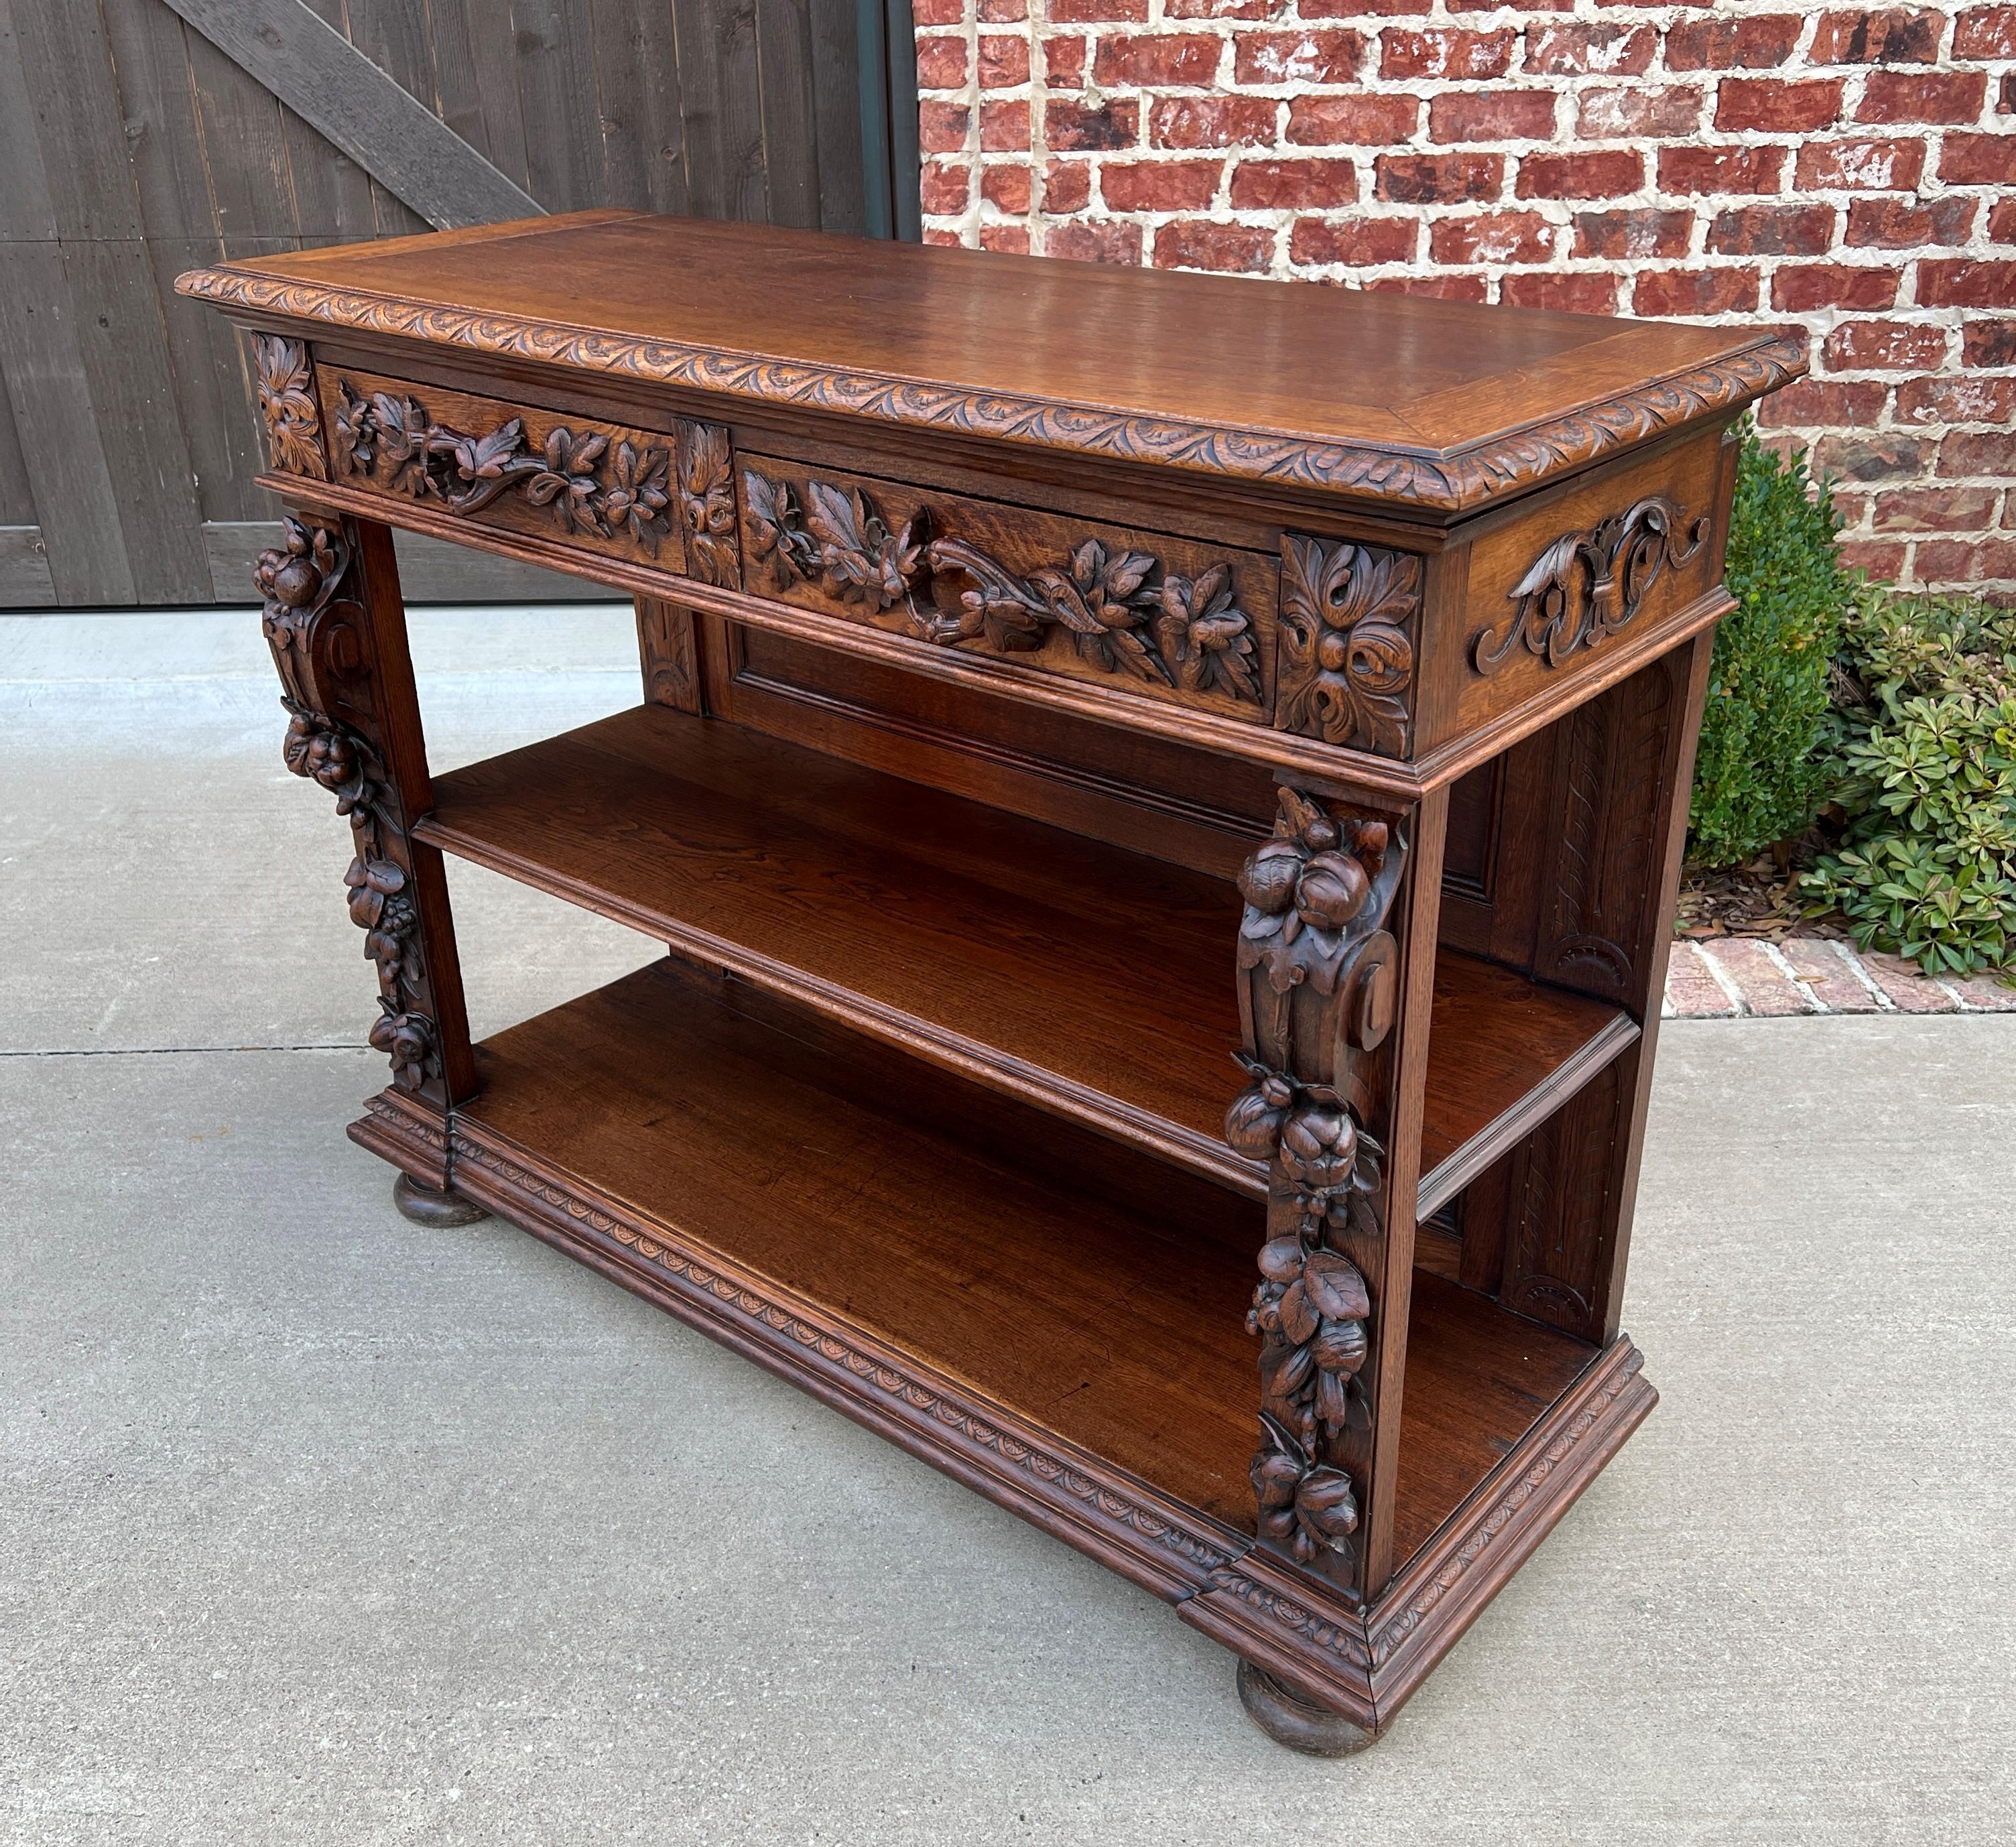 Antique French Server Sideboard Console Sofa Table 3-Tier Drawers Carved Oak 19c For Sale 8